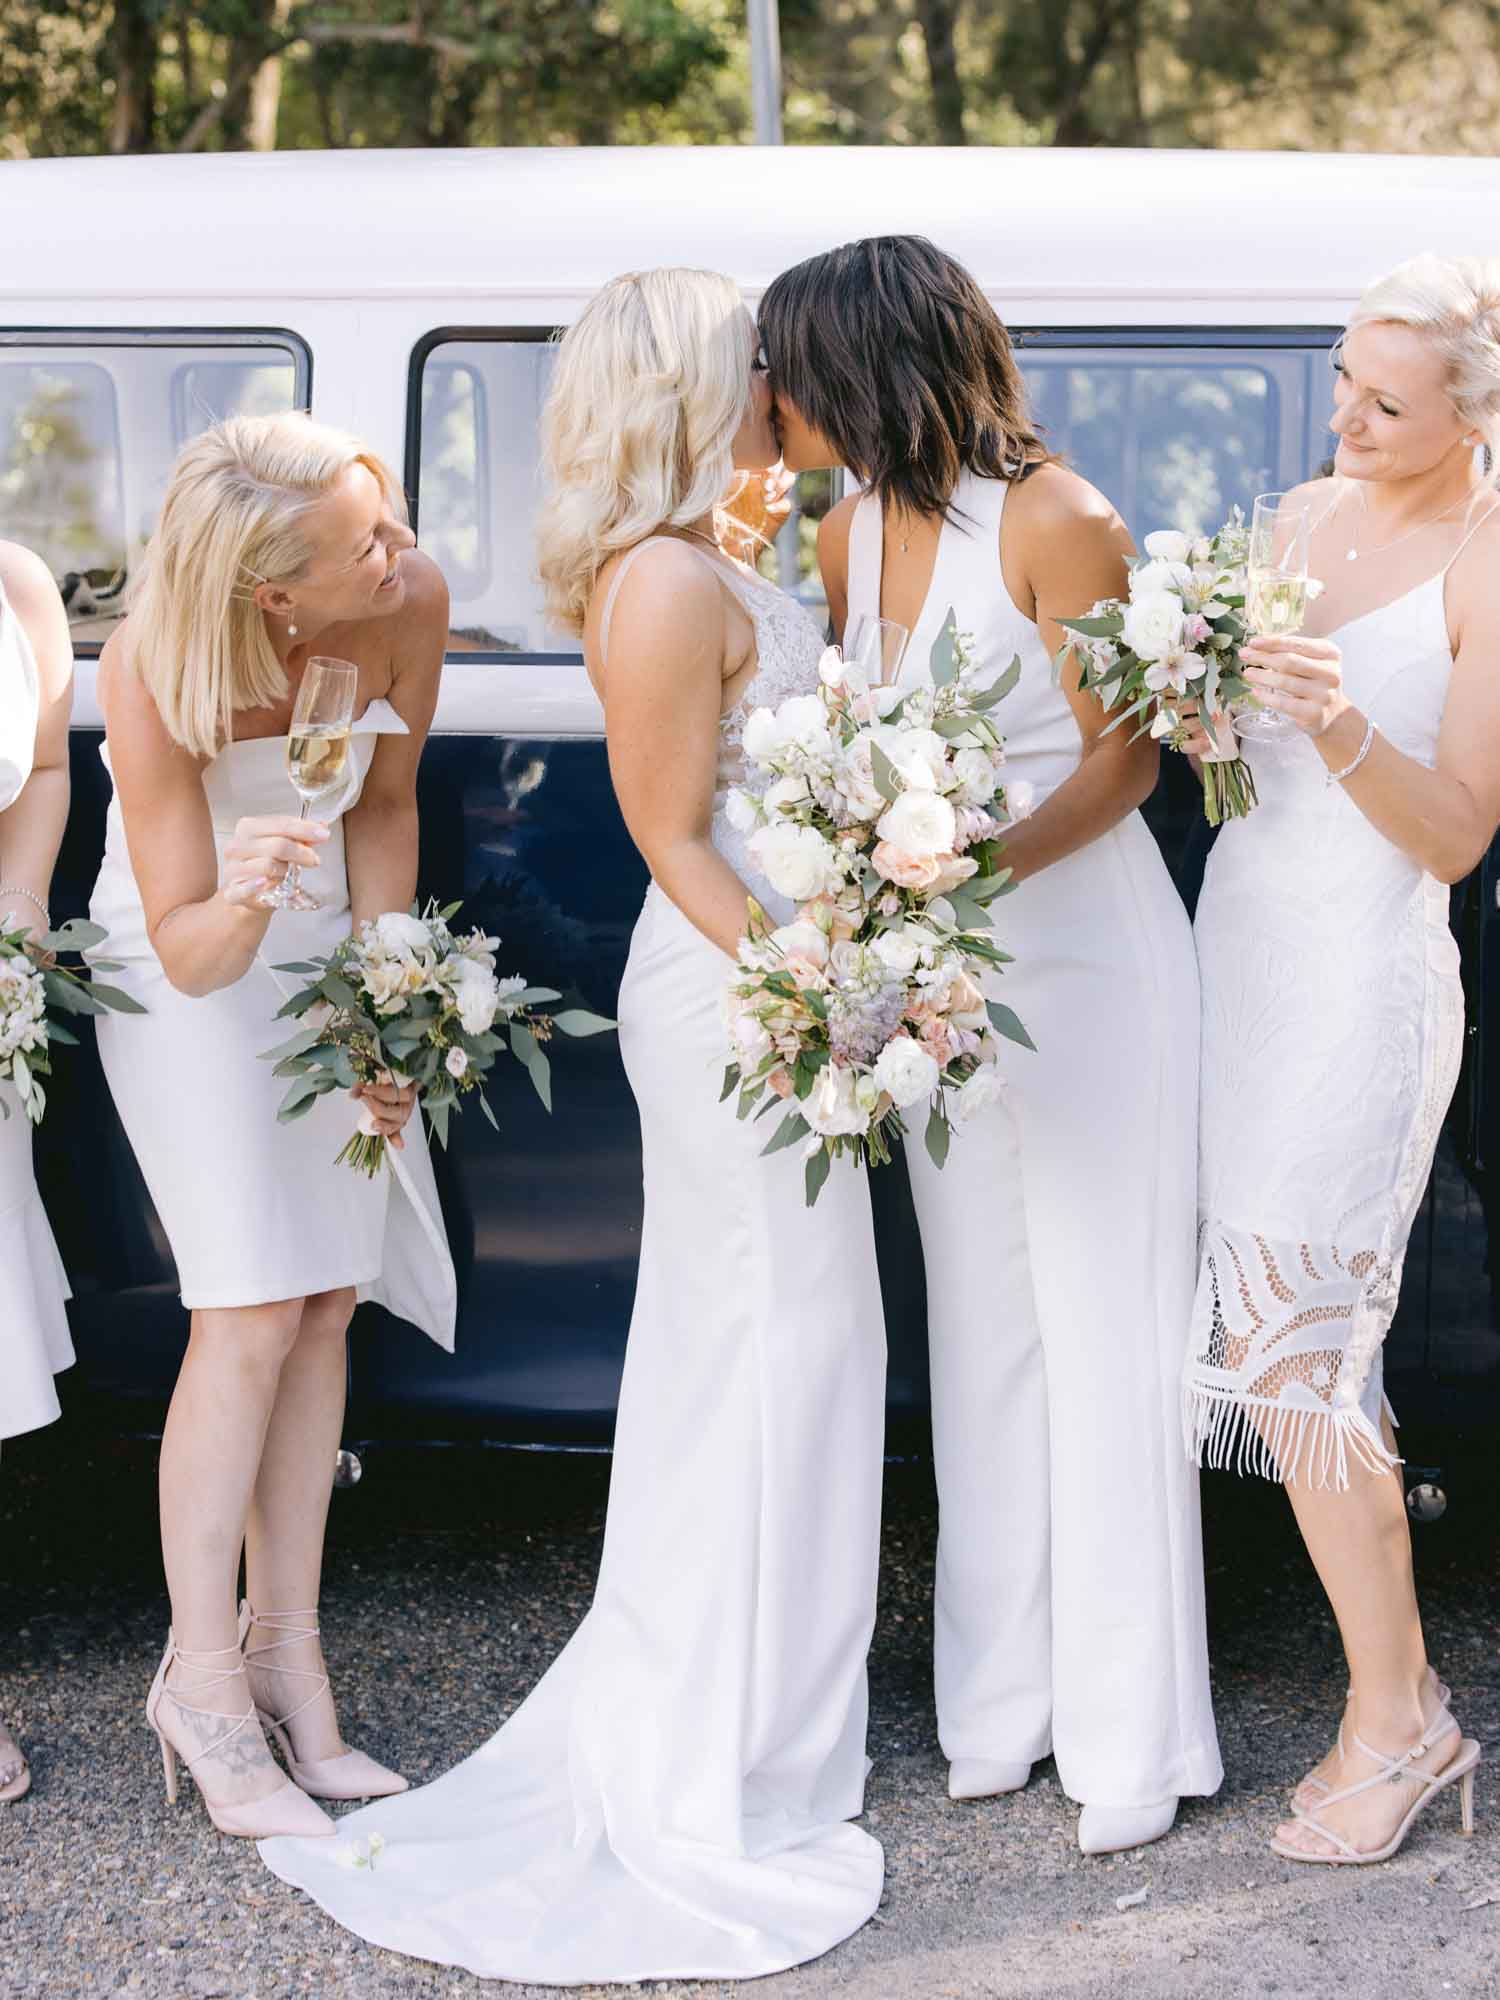 Intimate DIY Australia wedding on the water | Yvonne Law Photography | Featured on Equally Wed, the leading LGBTQ+ wedding magazine